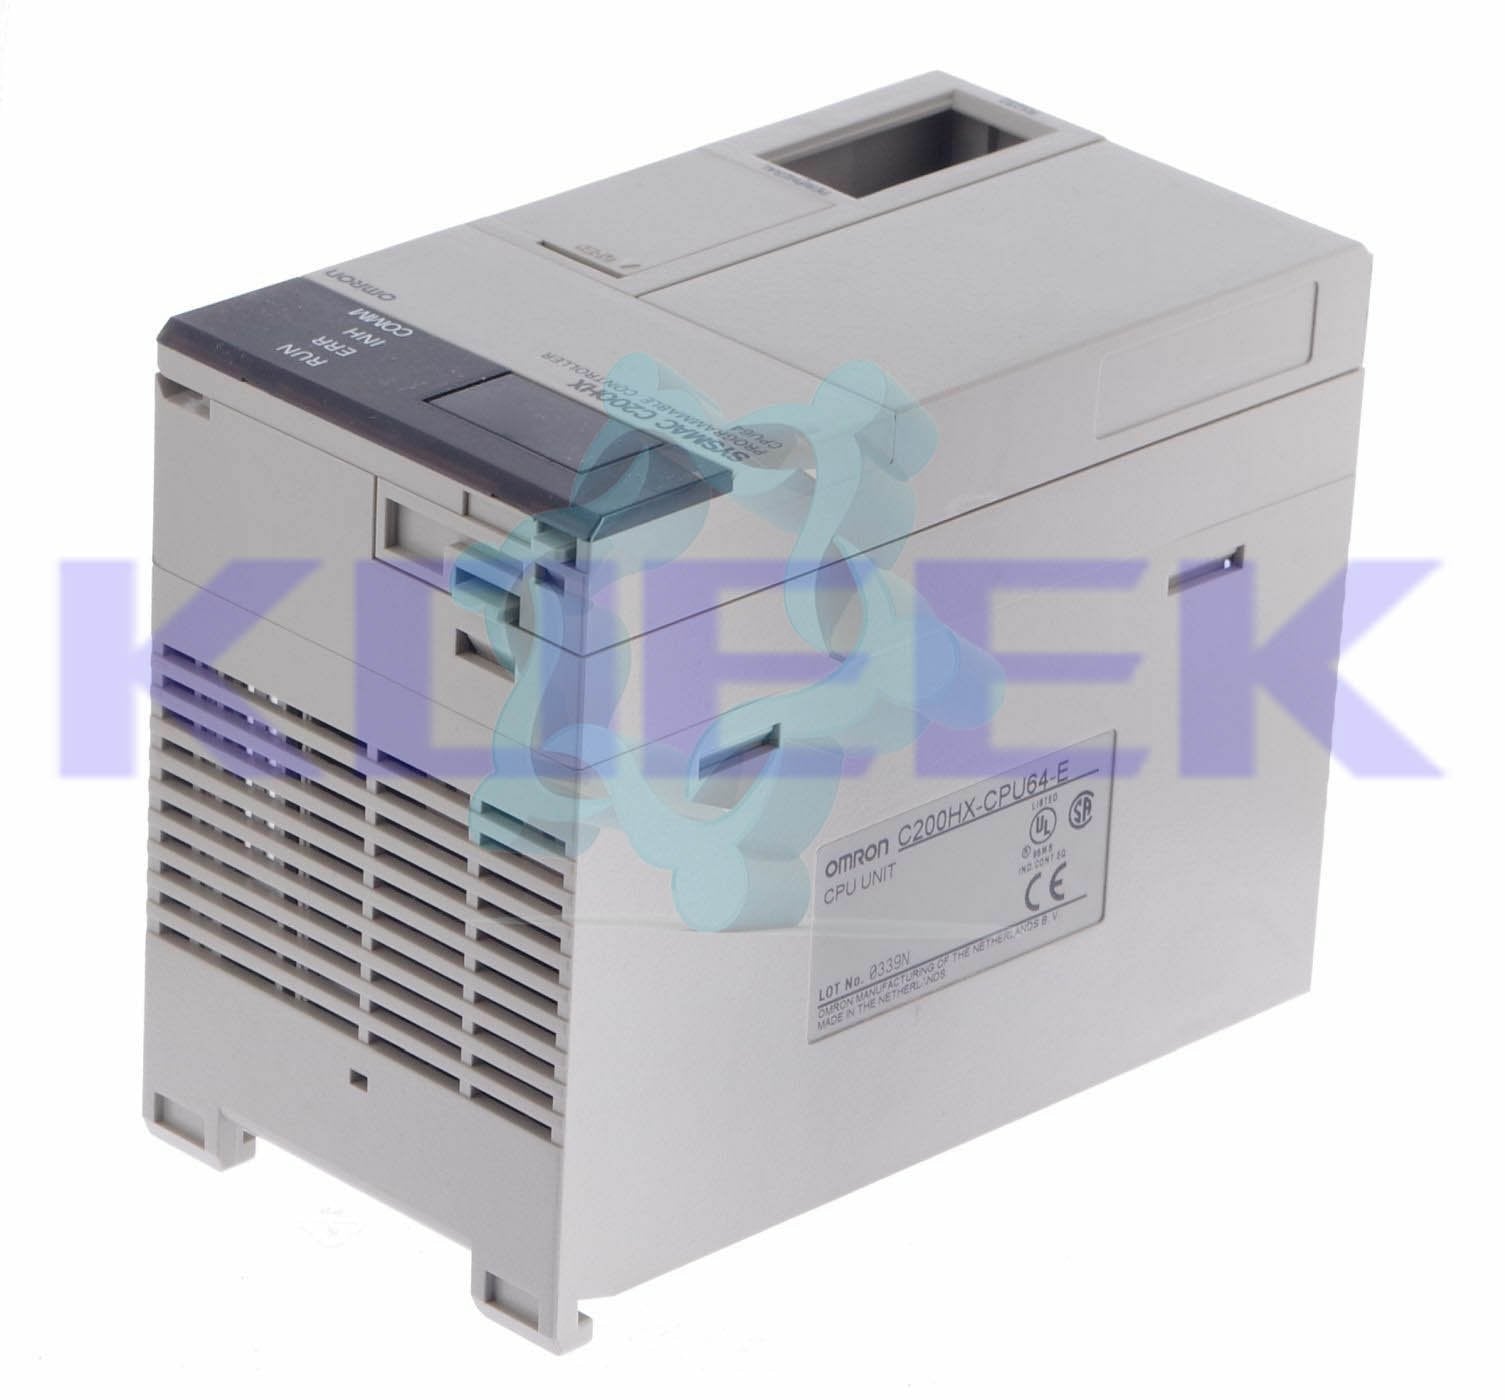 C200HXCPU64-E KOEED 201-500, 80%, import_2020_10_10_031751, Omron, Other